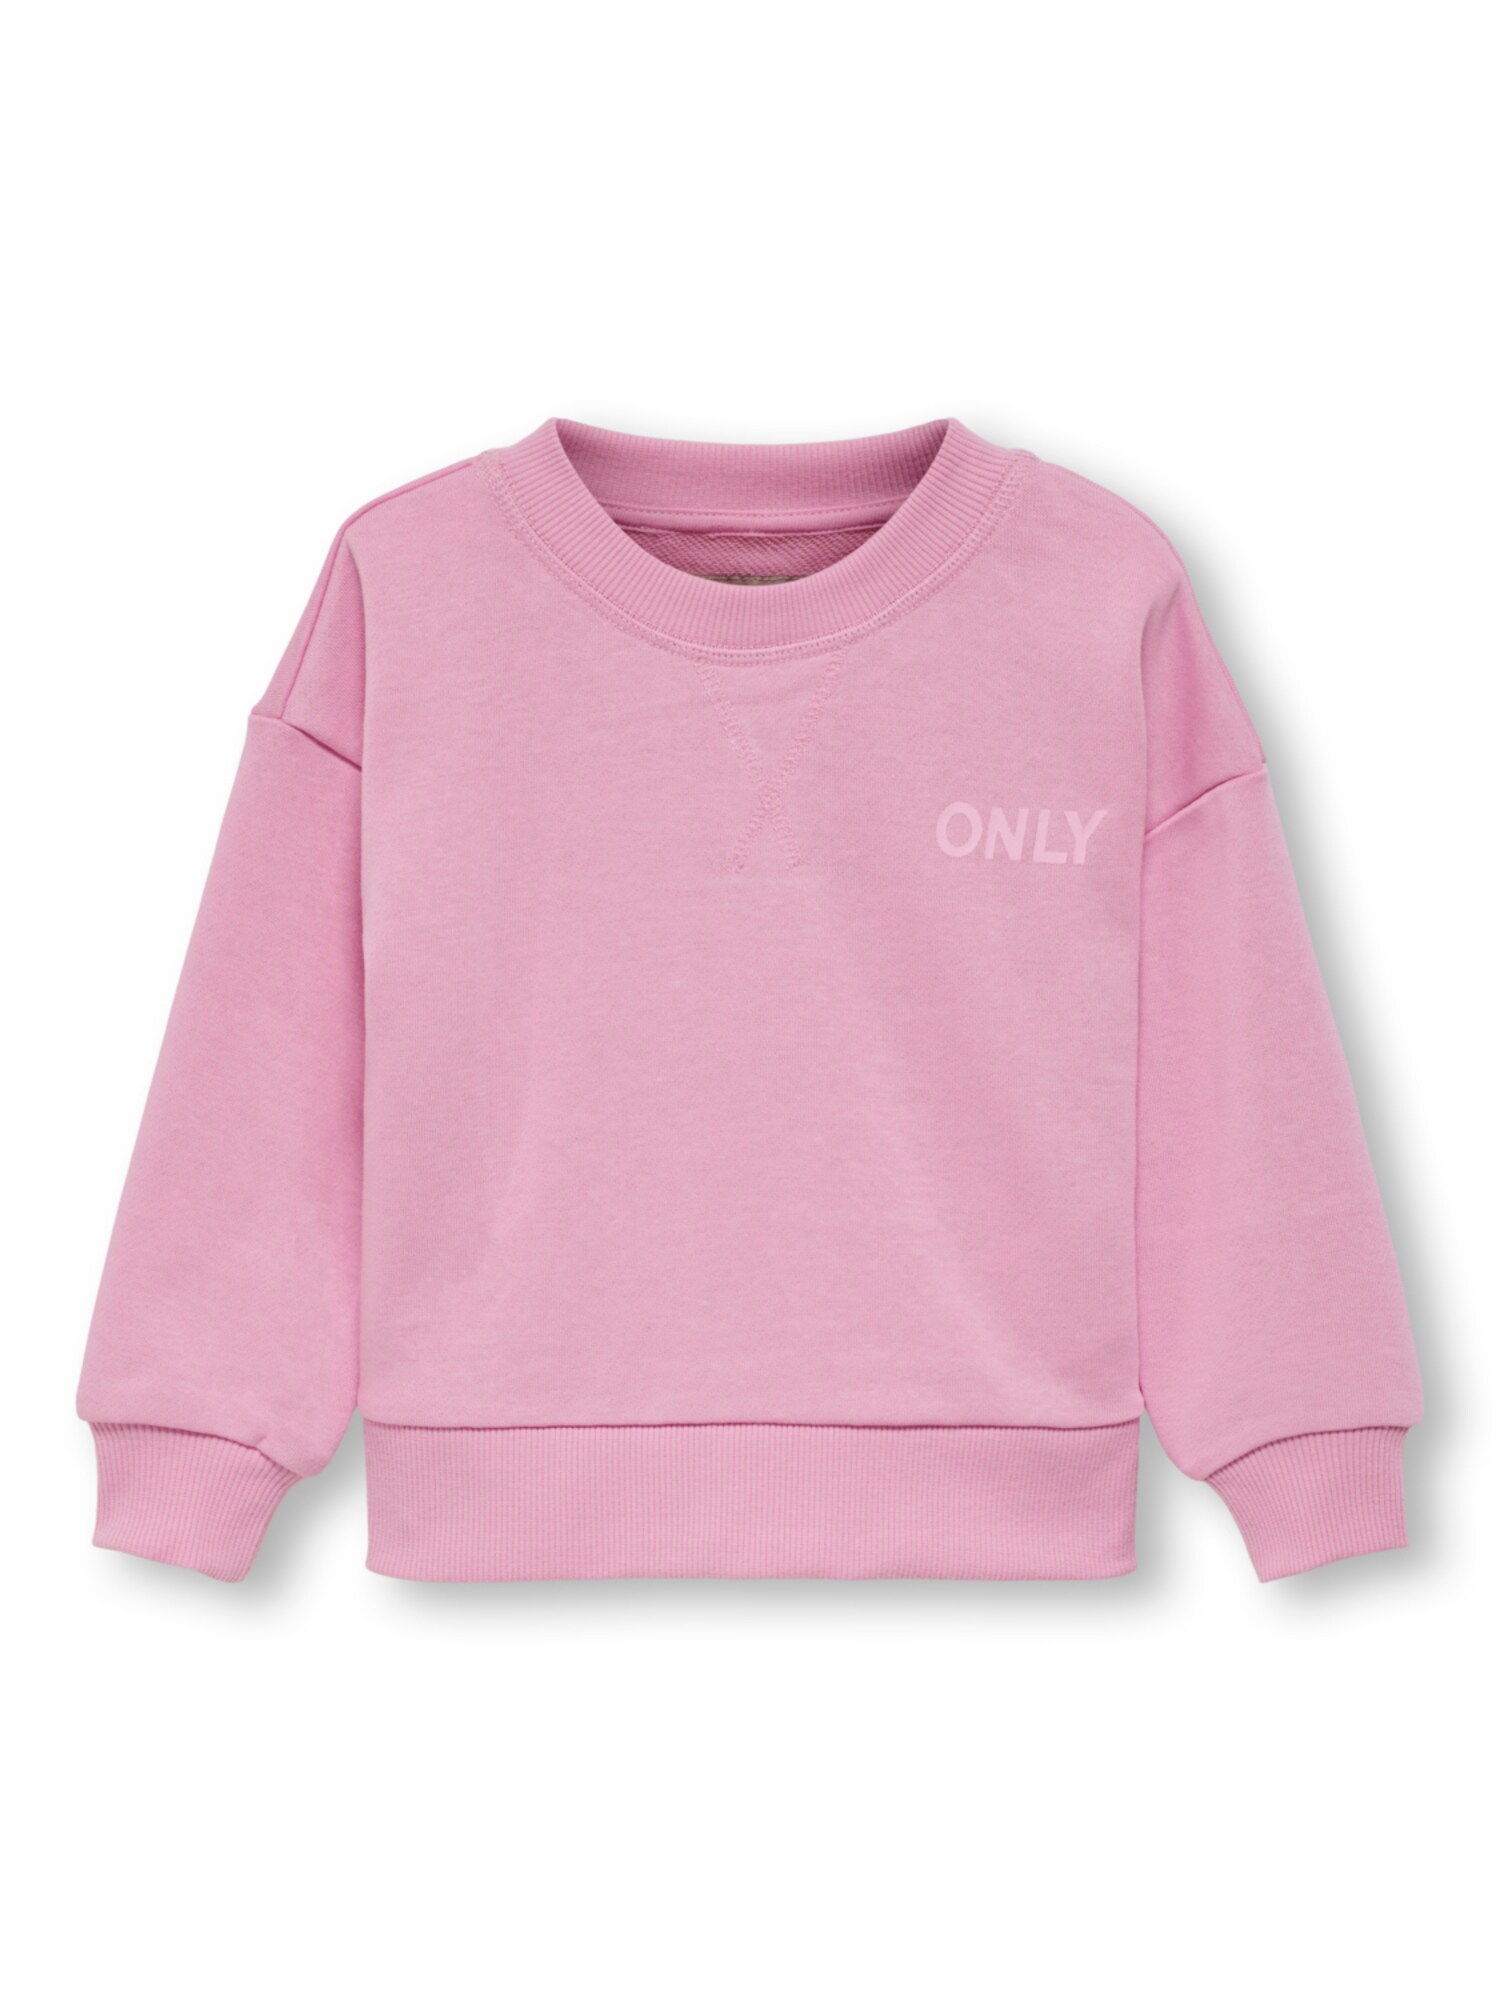 KIDS ONLY Mikina 'Never' pink